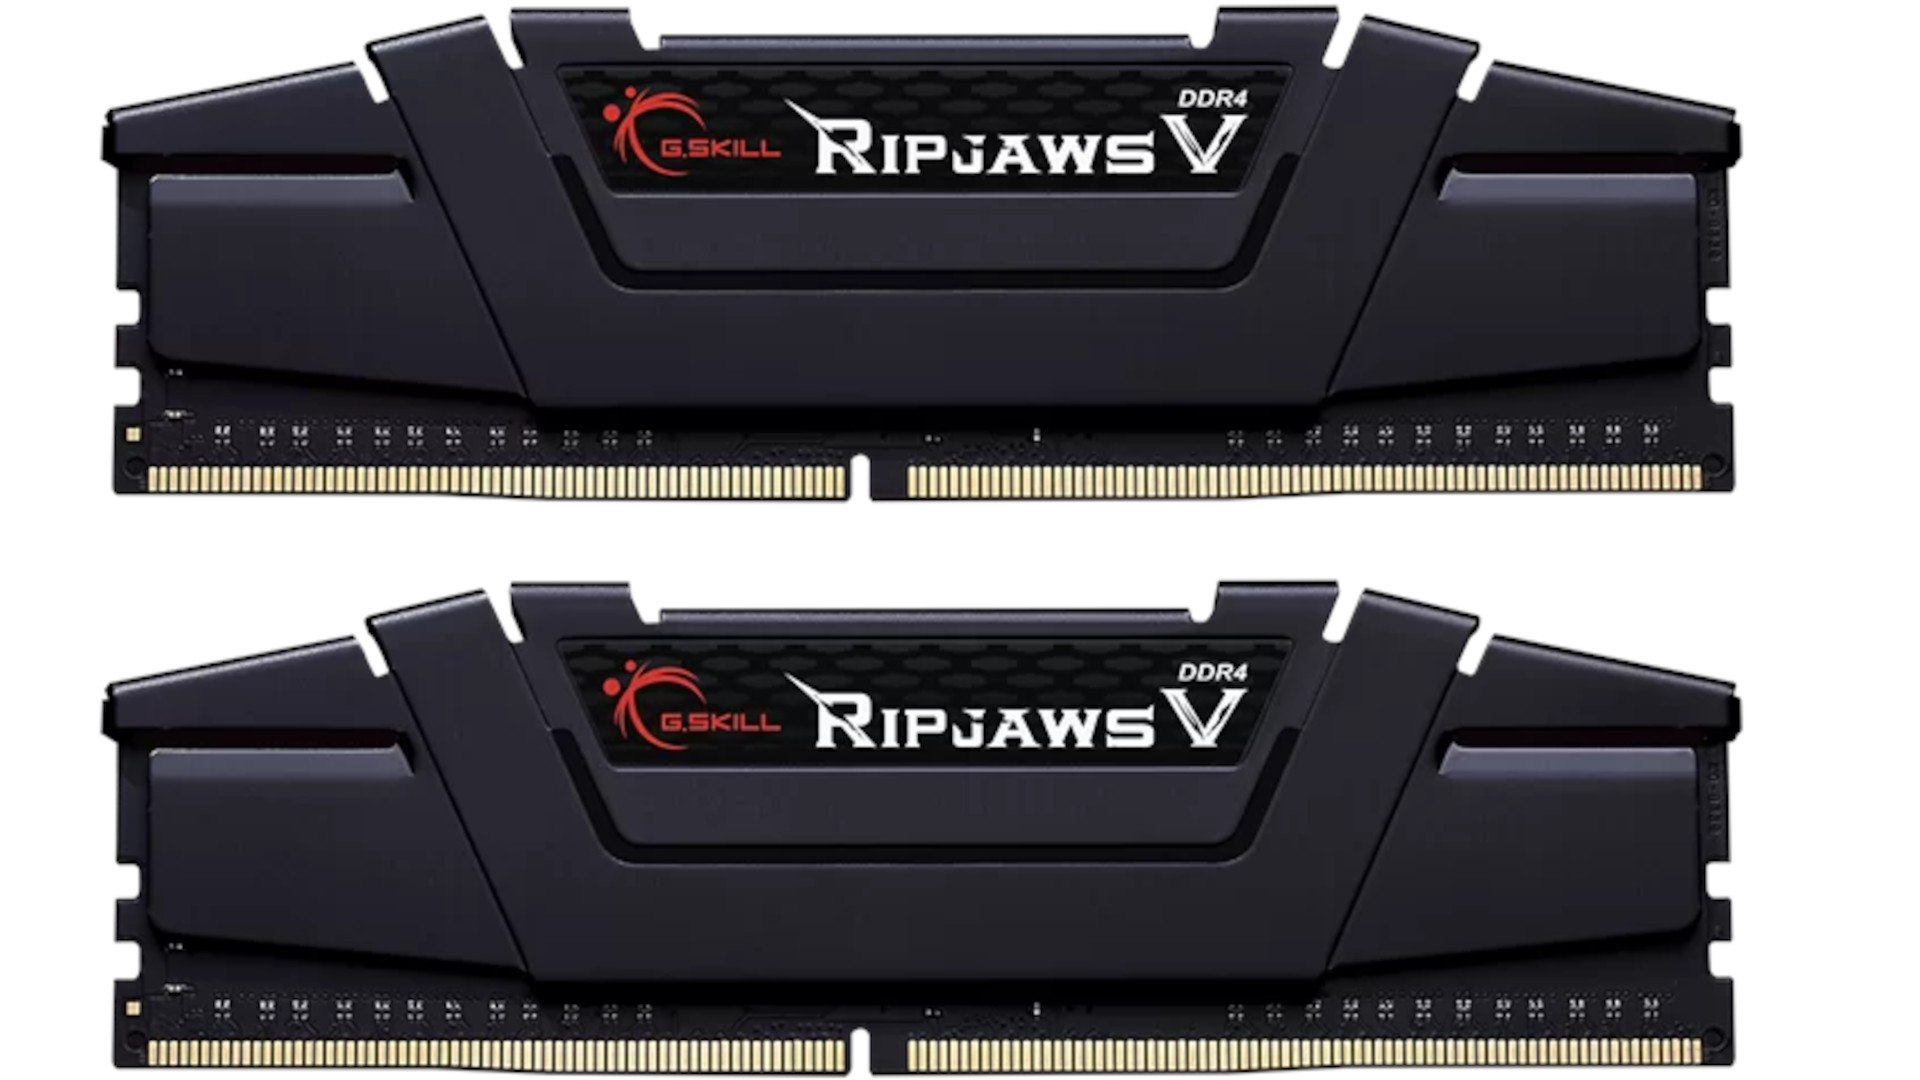 You are currently viewing G.SKILL Ripjaws V DDR4 3200 CL16 2x4GB RAM Review